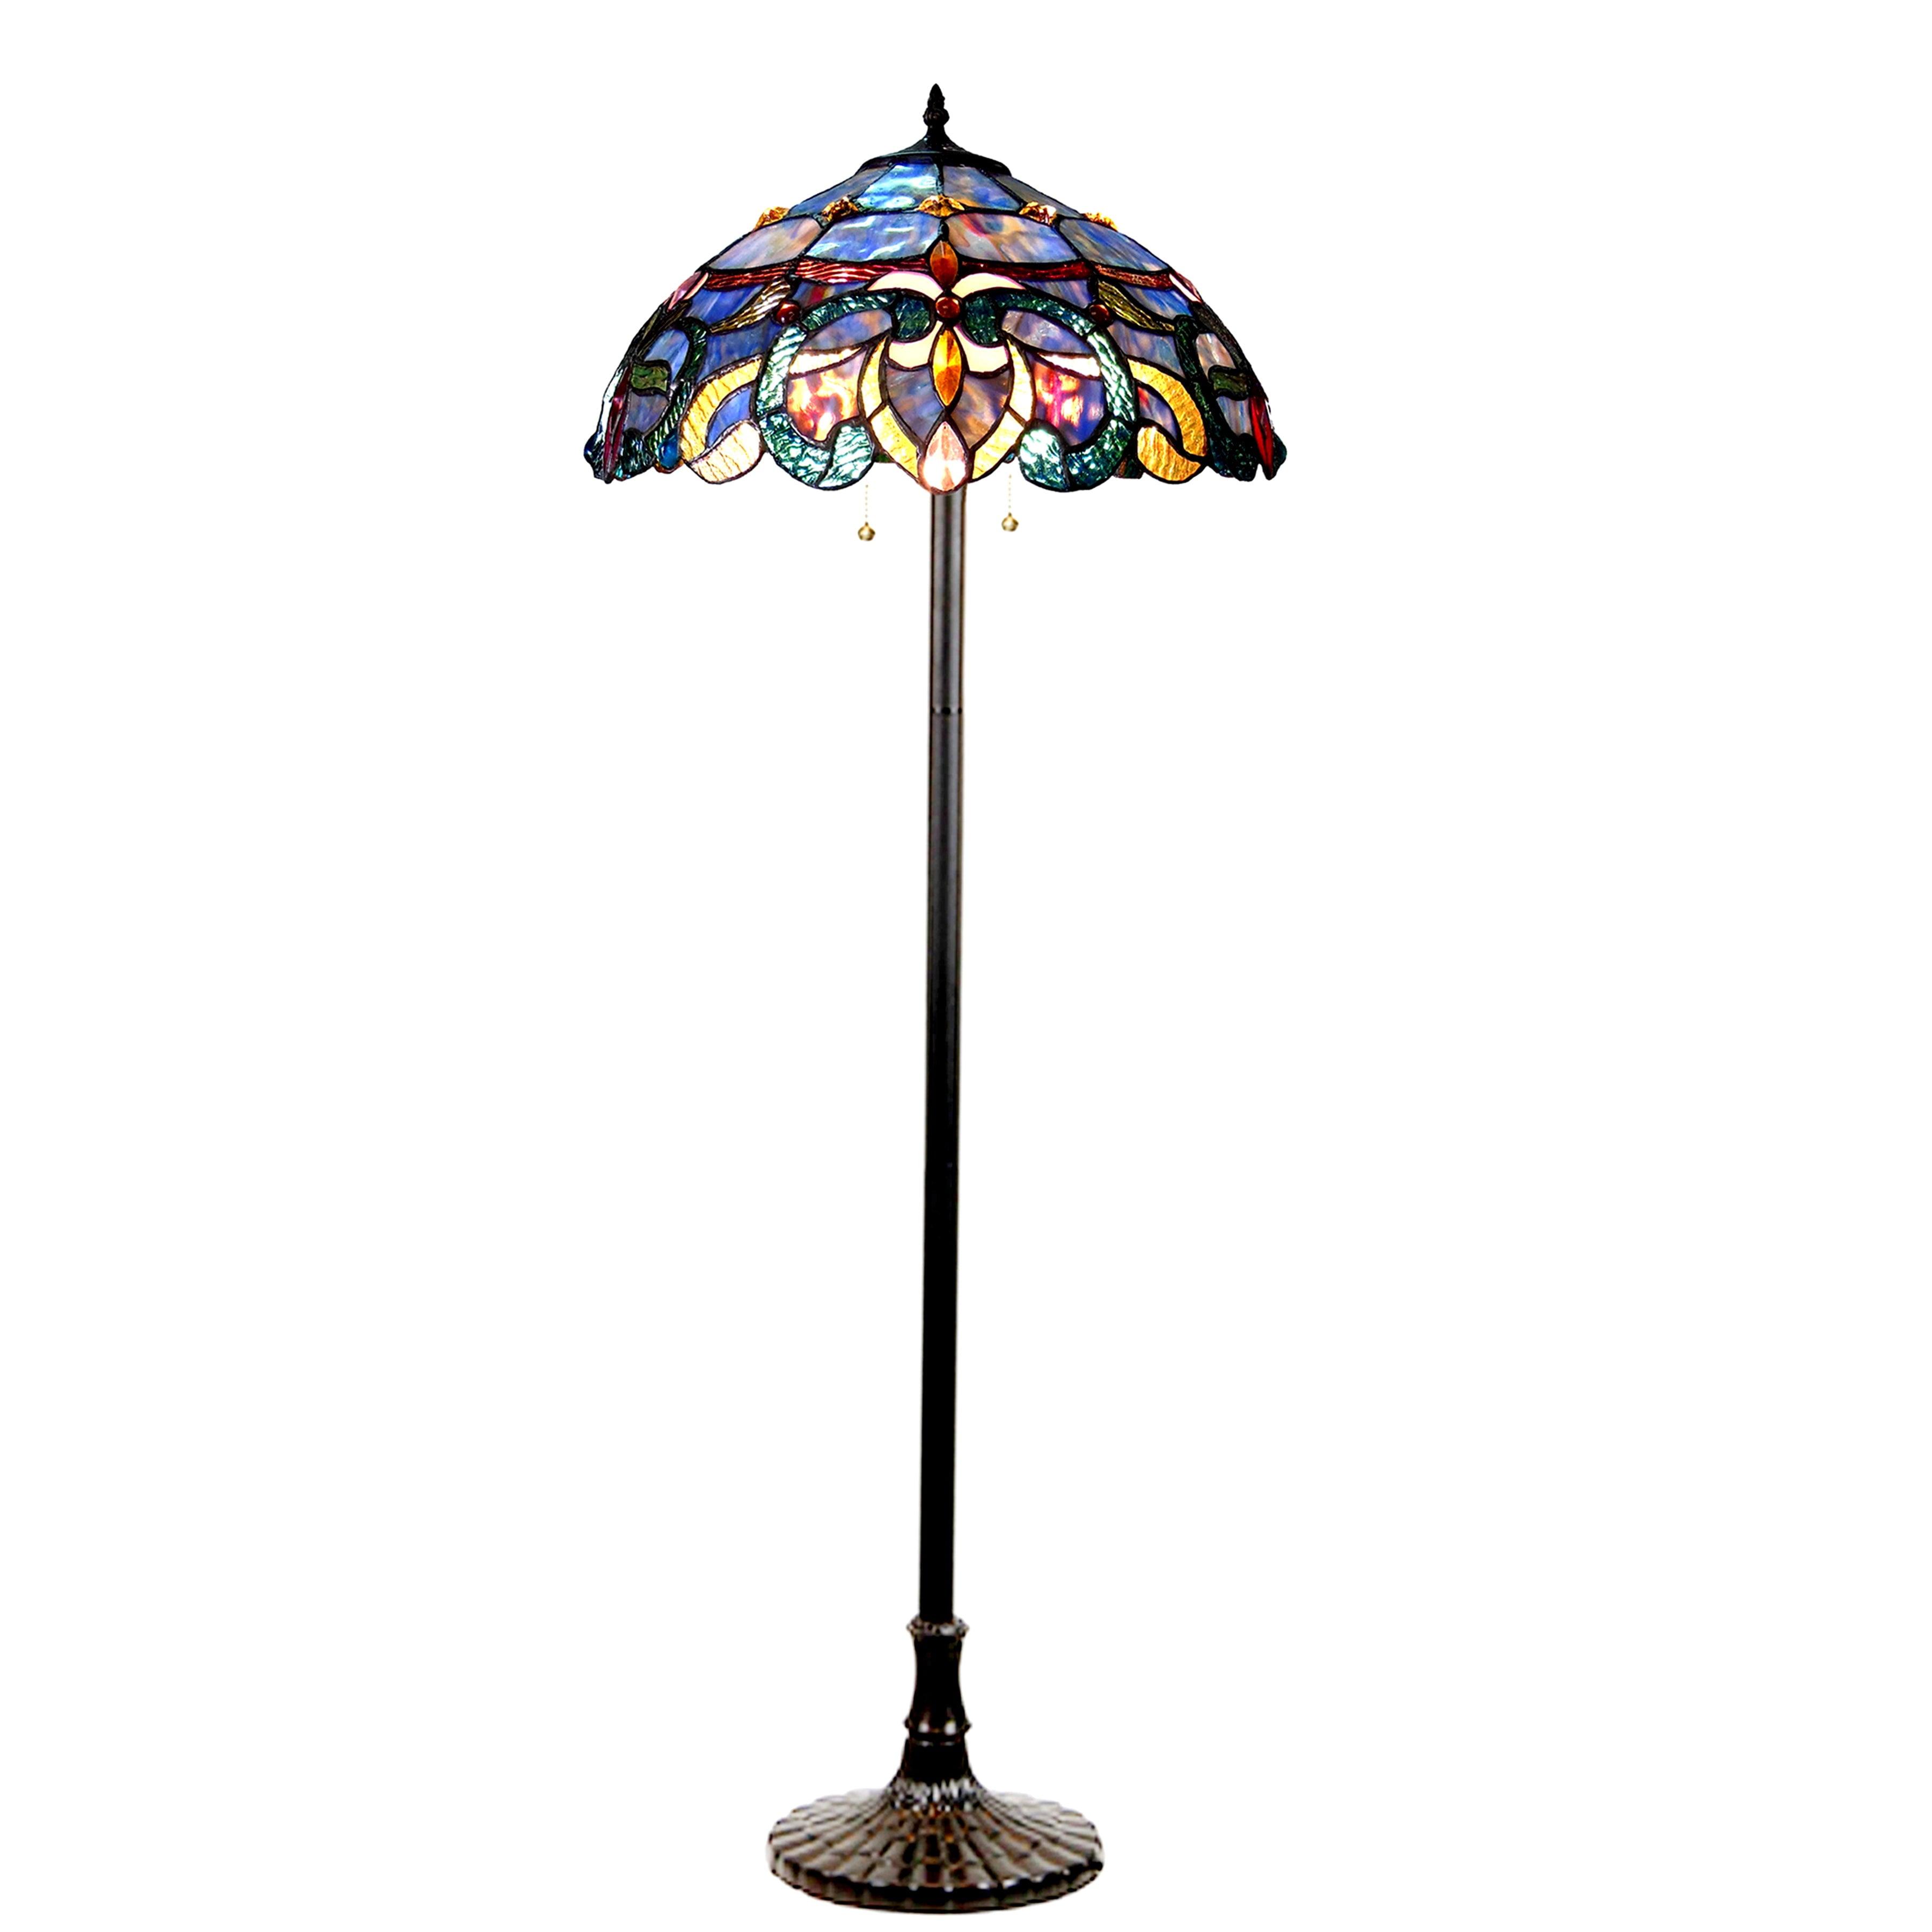 Victorian Elegance Tiffany-Style Blue Stained Glass Floor Lamp